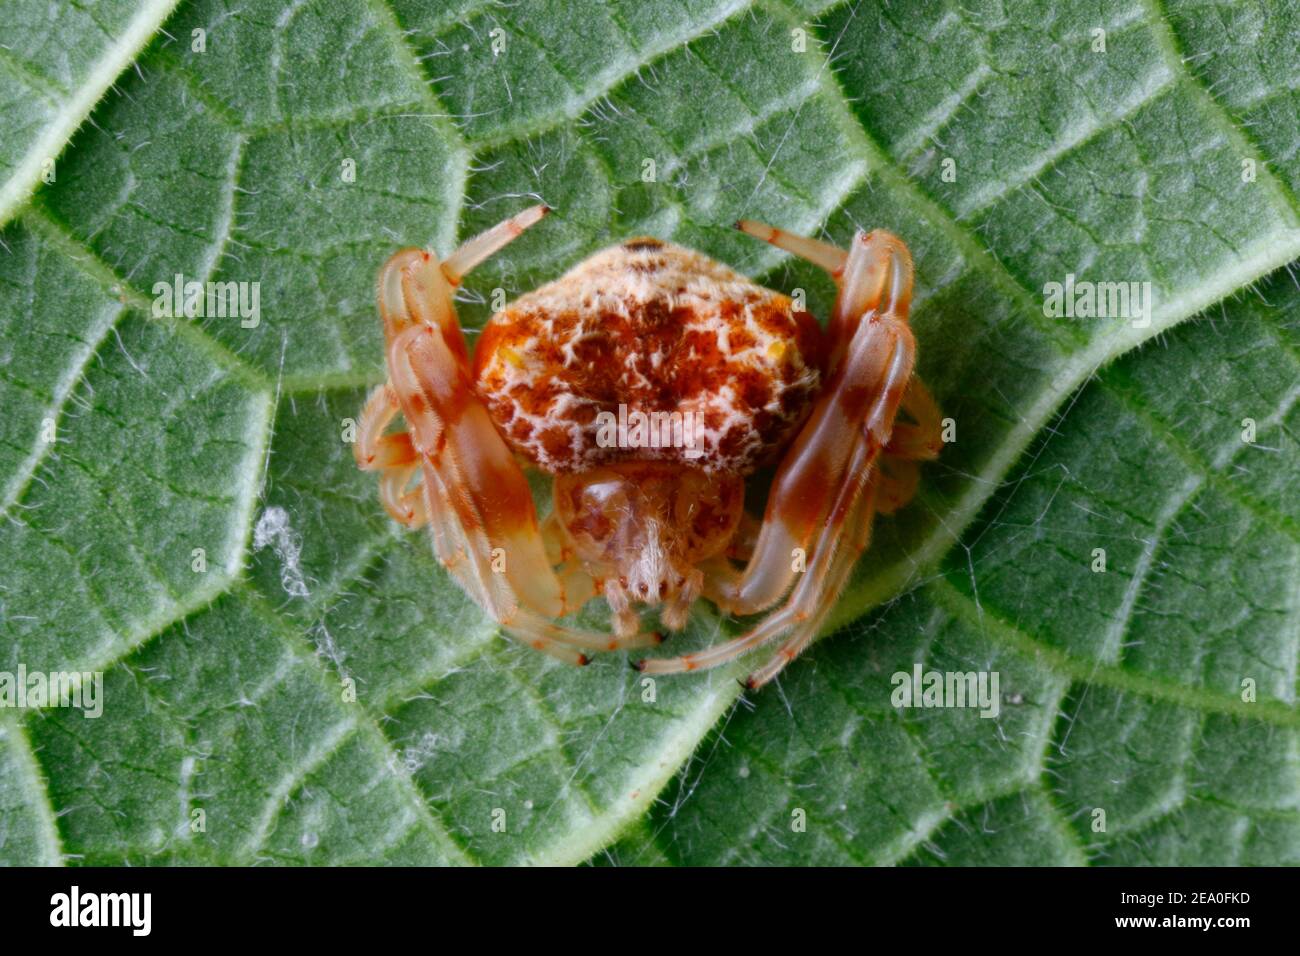 A Bolas spider looks like a bird dropping on a leaf. Stock Photo